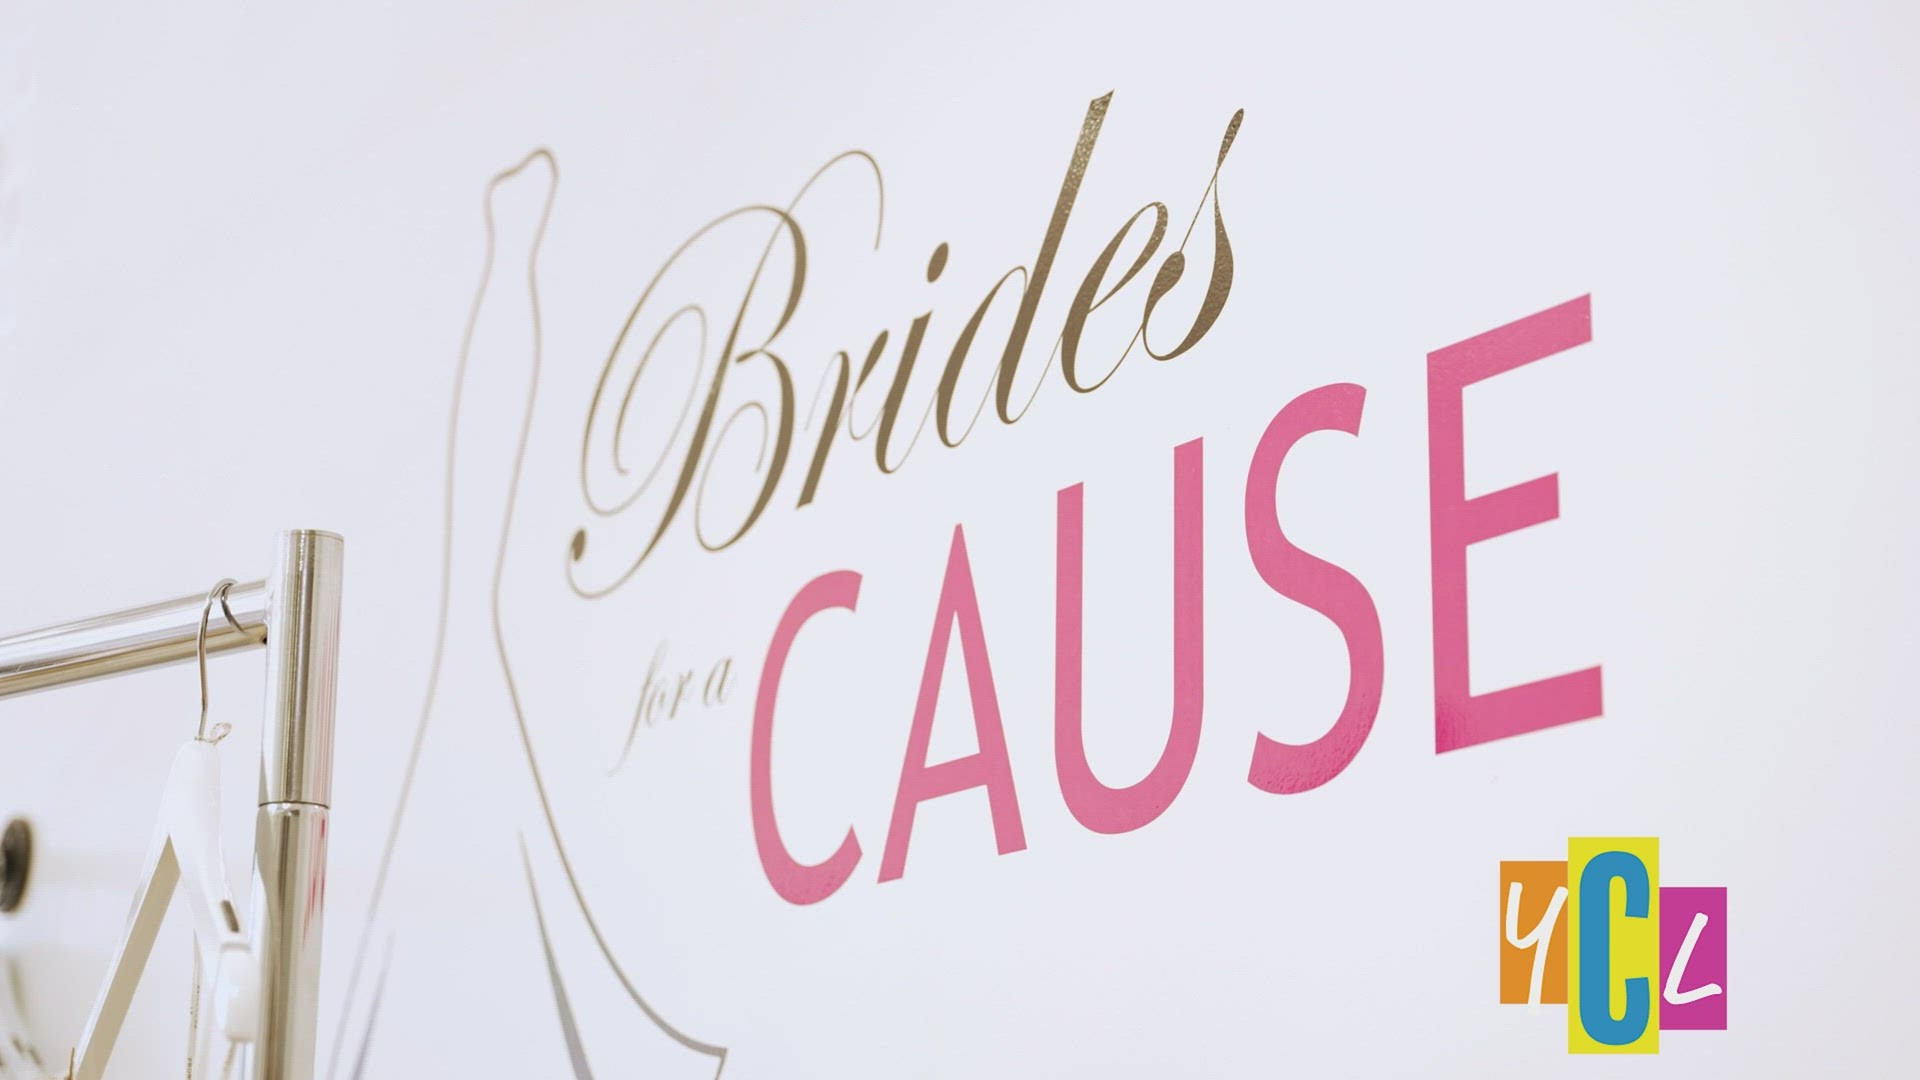 Find out about the social entrepreneurs making bridal dreams come true, one dress at a time.